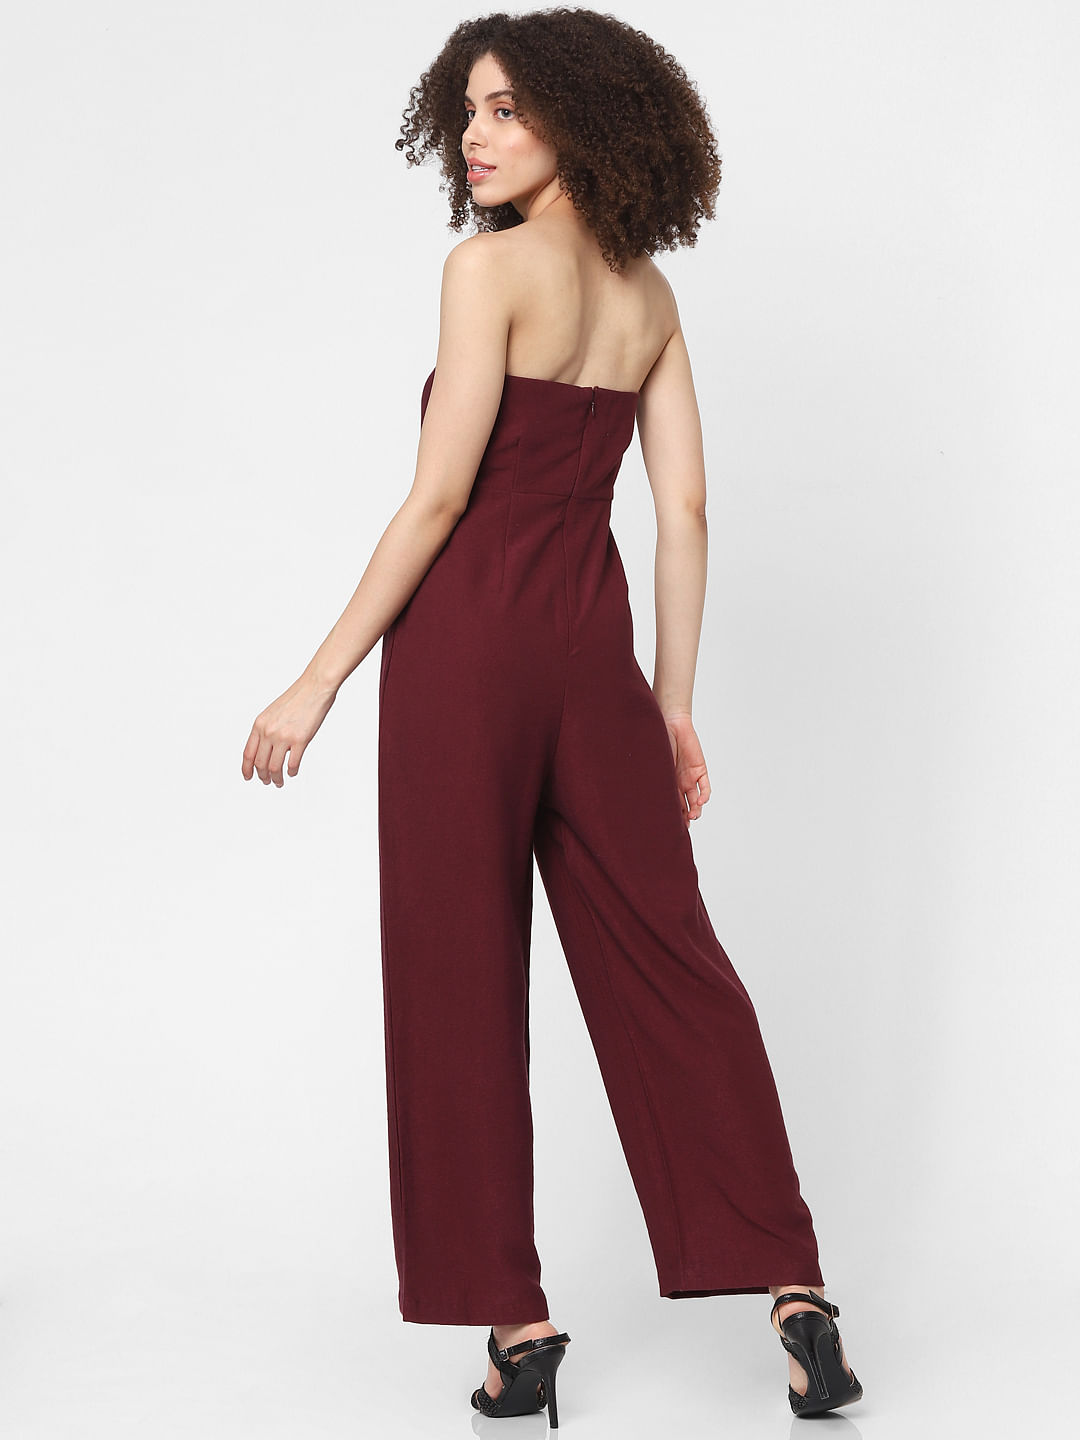 WideLeg Jumpsuits Striped Floral  More  Women  Forever 21